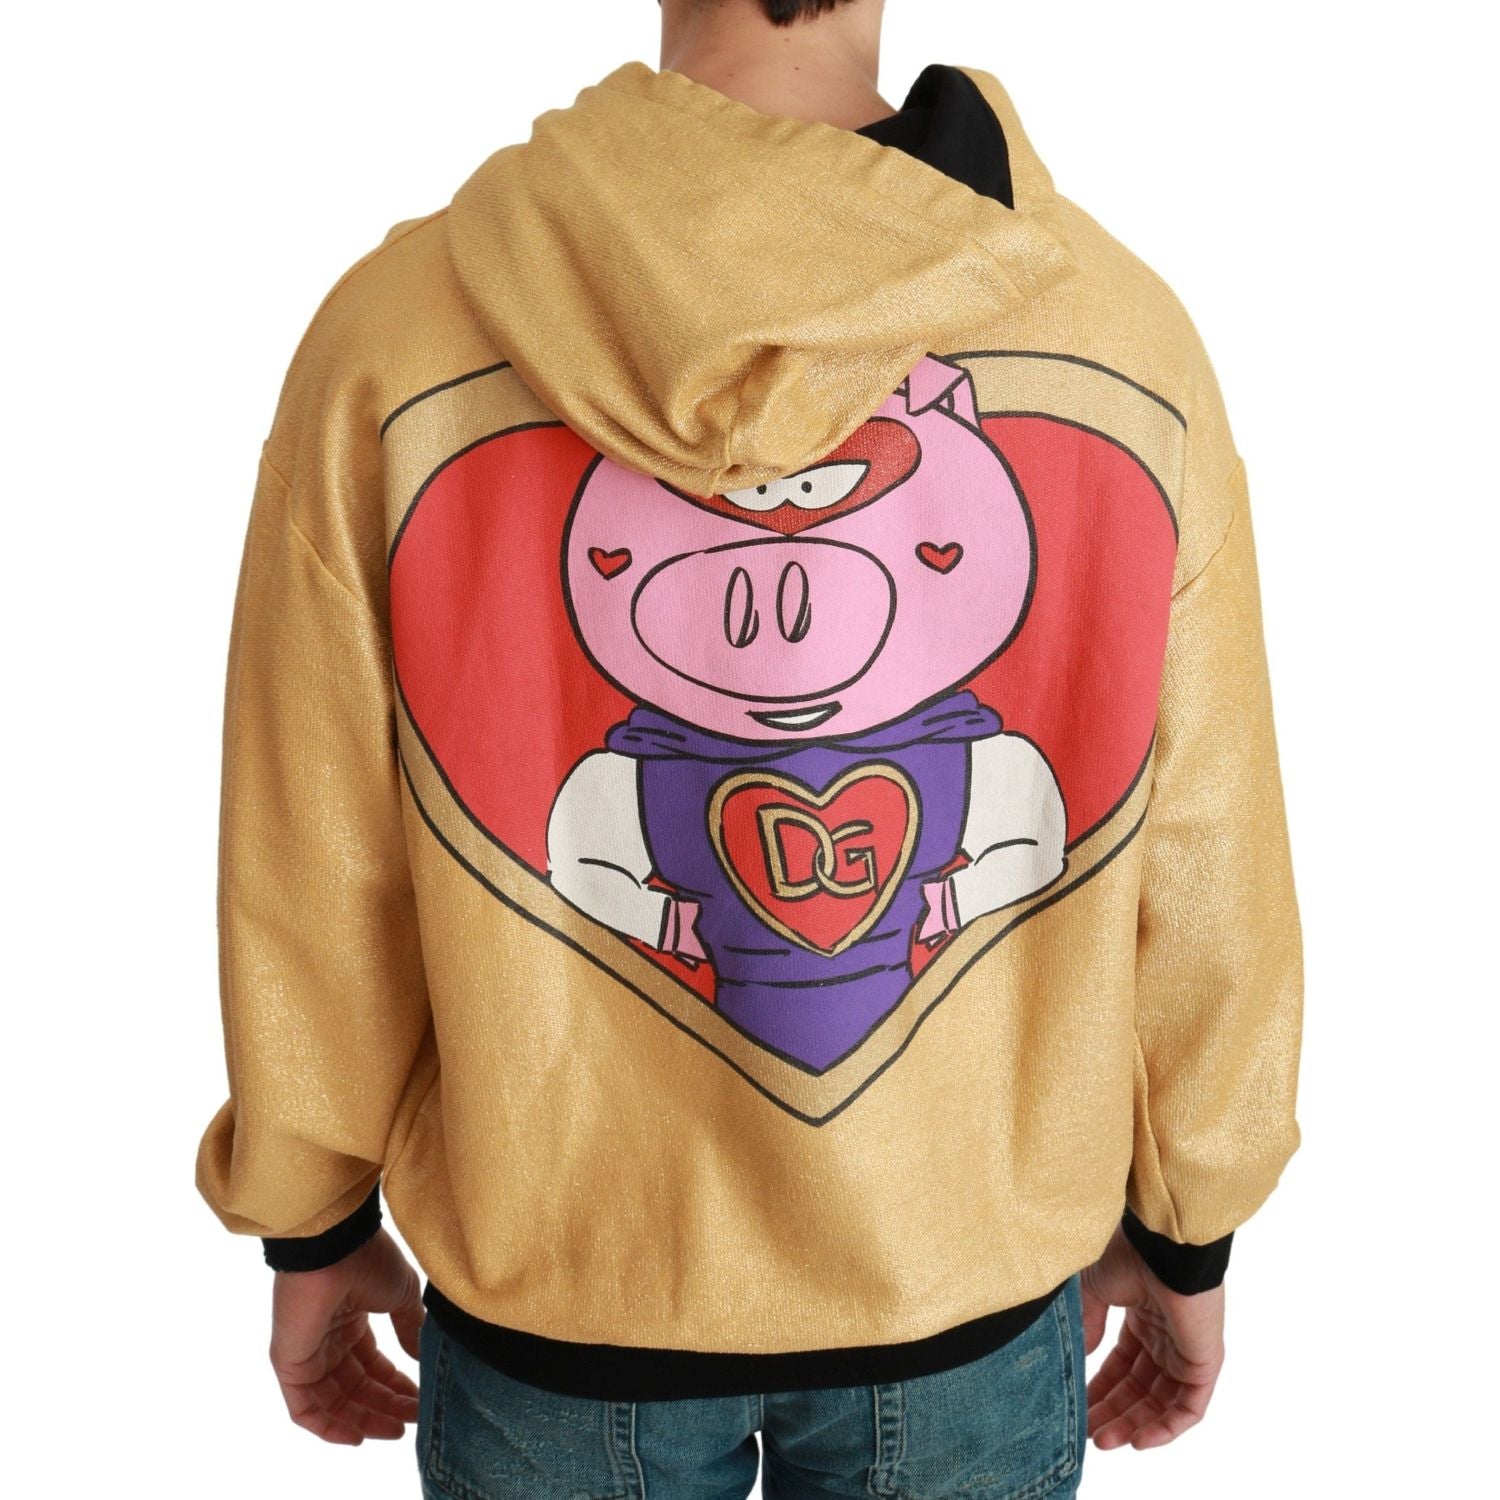 Dolce & Gabbana | Gold Pig of the Year Hooded Sweater | McRichard Designer Brands